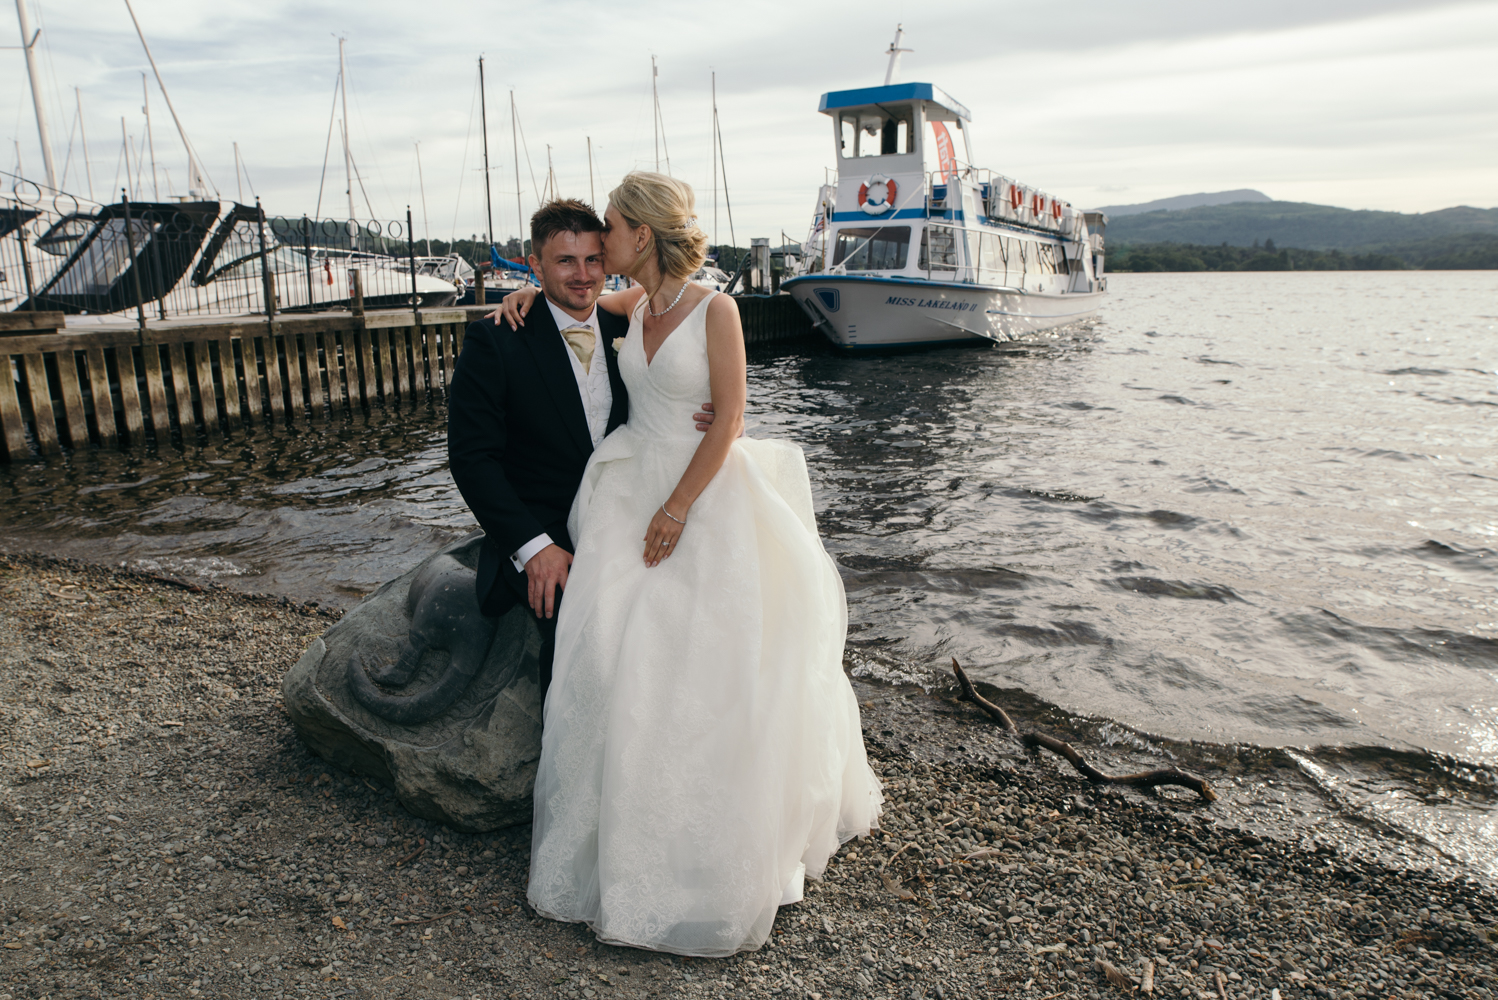 The bride and groom sitting on a commemorative stone by the jetty just after the lake cruise 